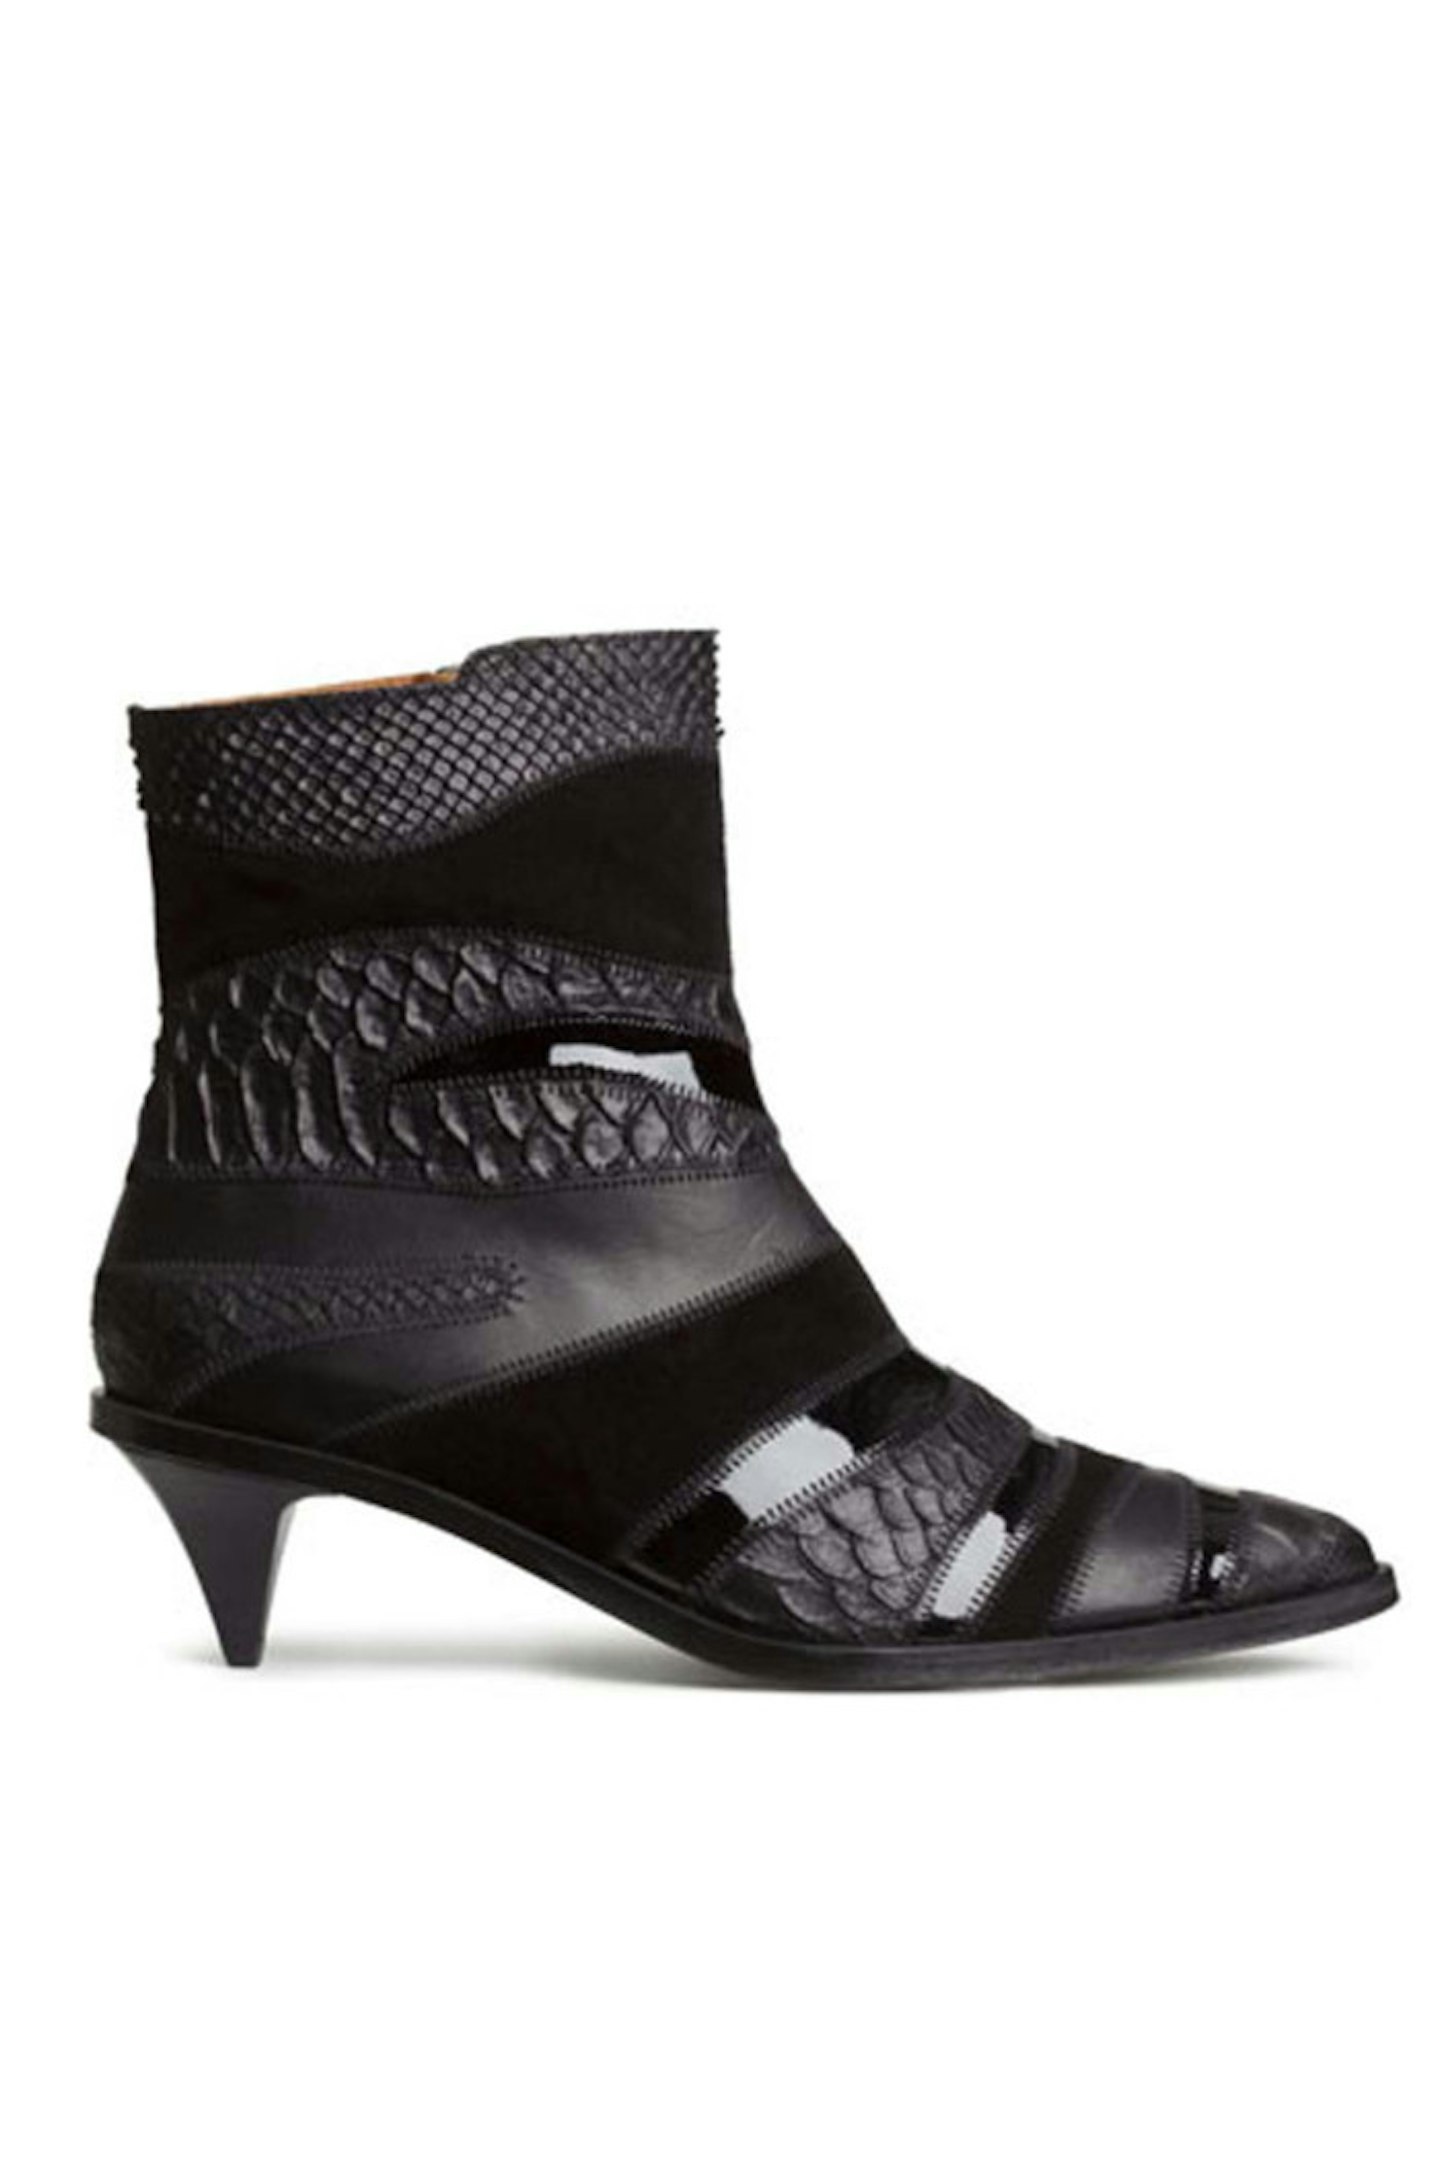 Leather Boots, £79.99, H&M